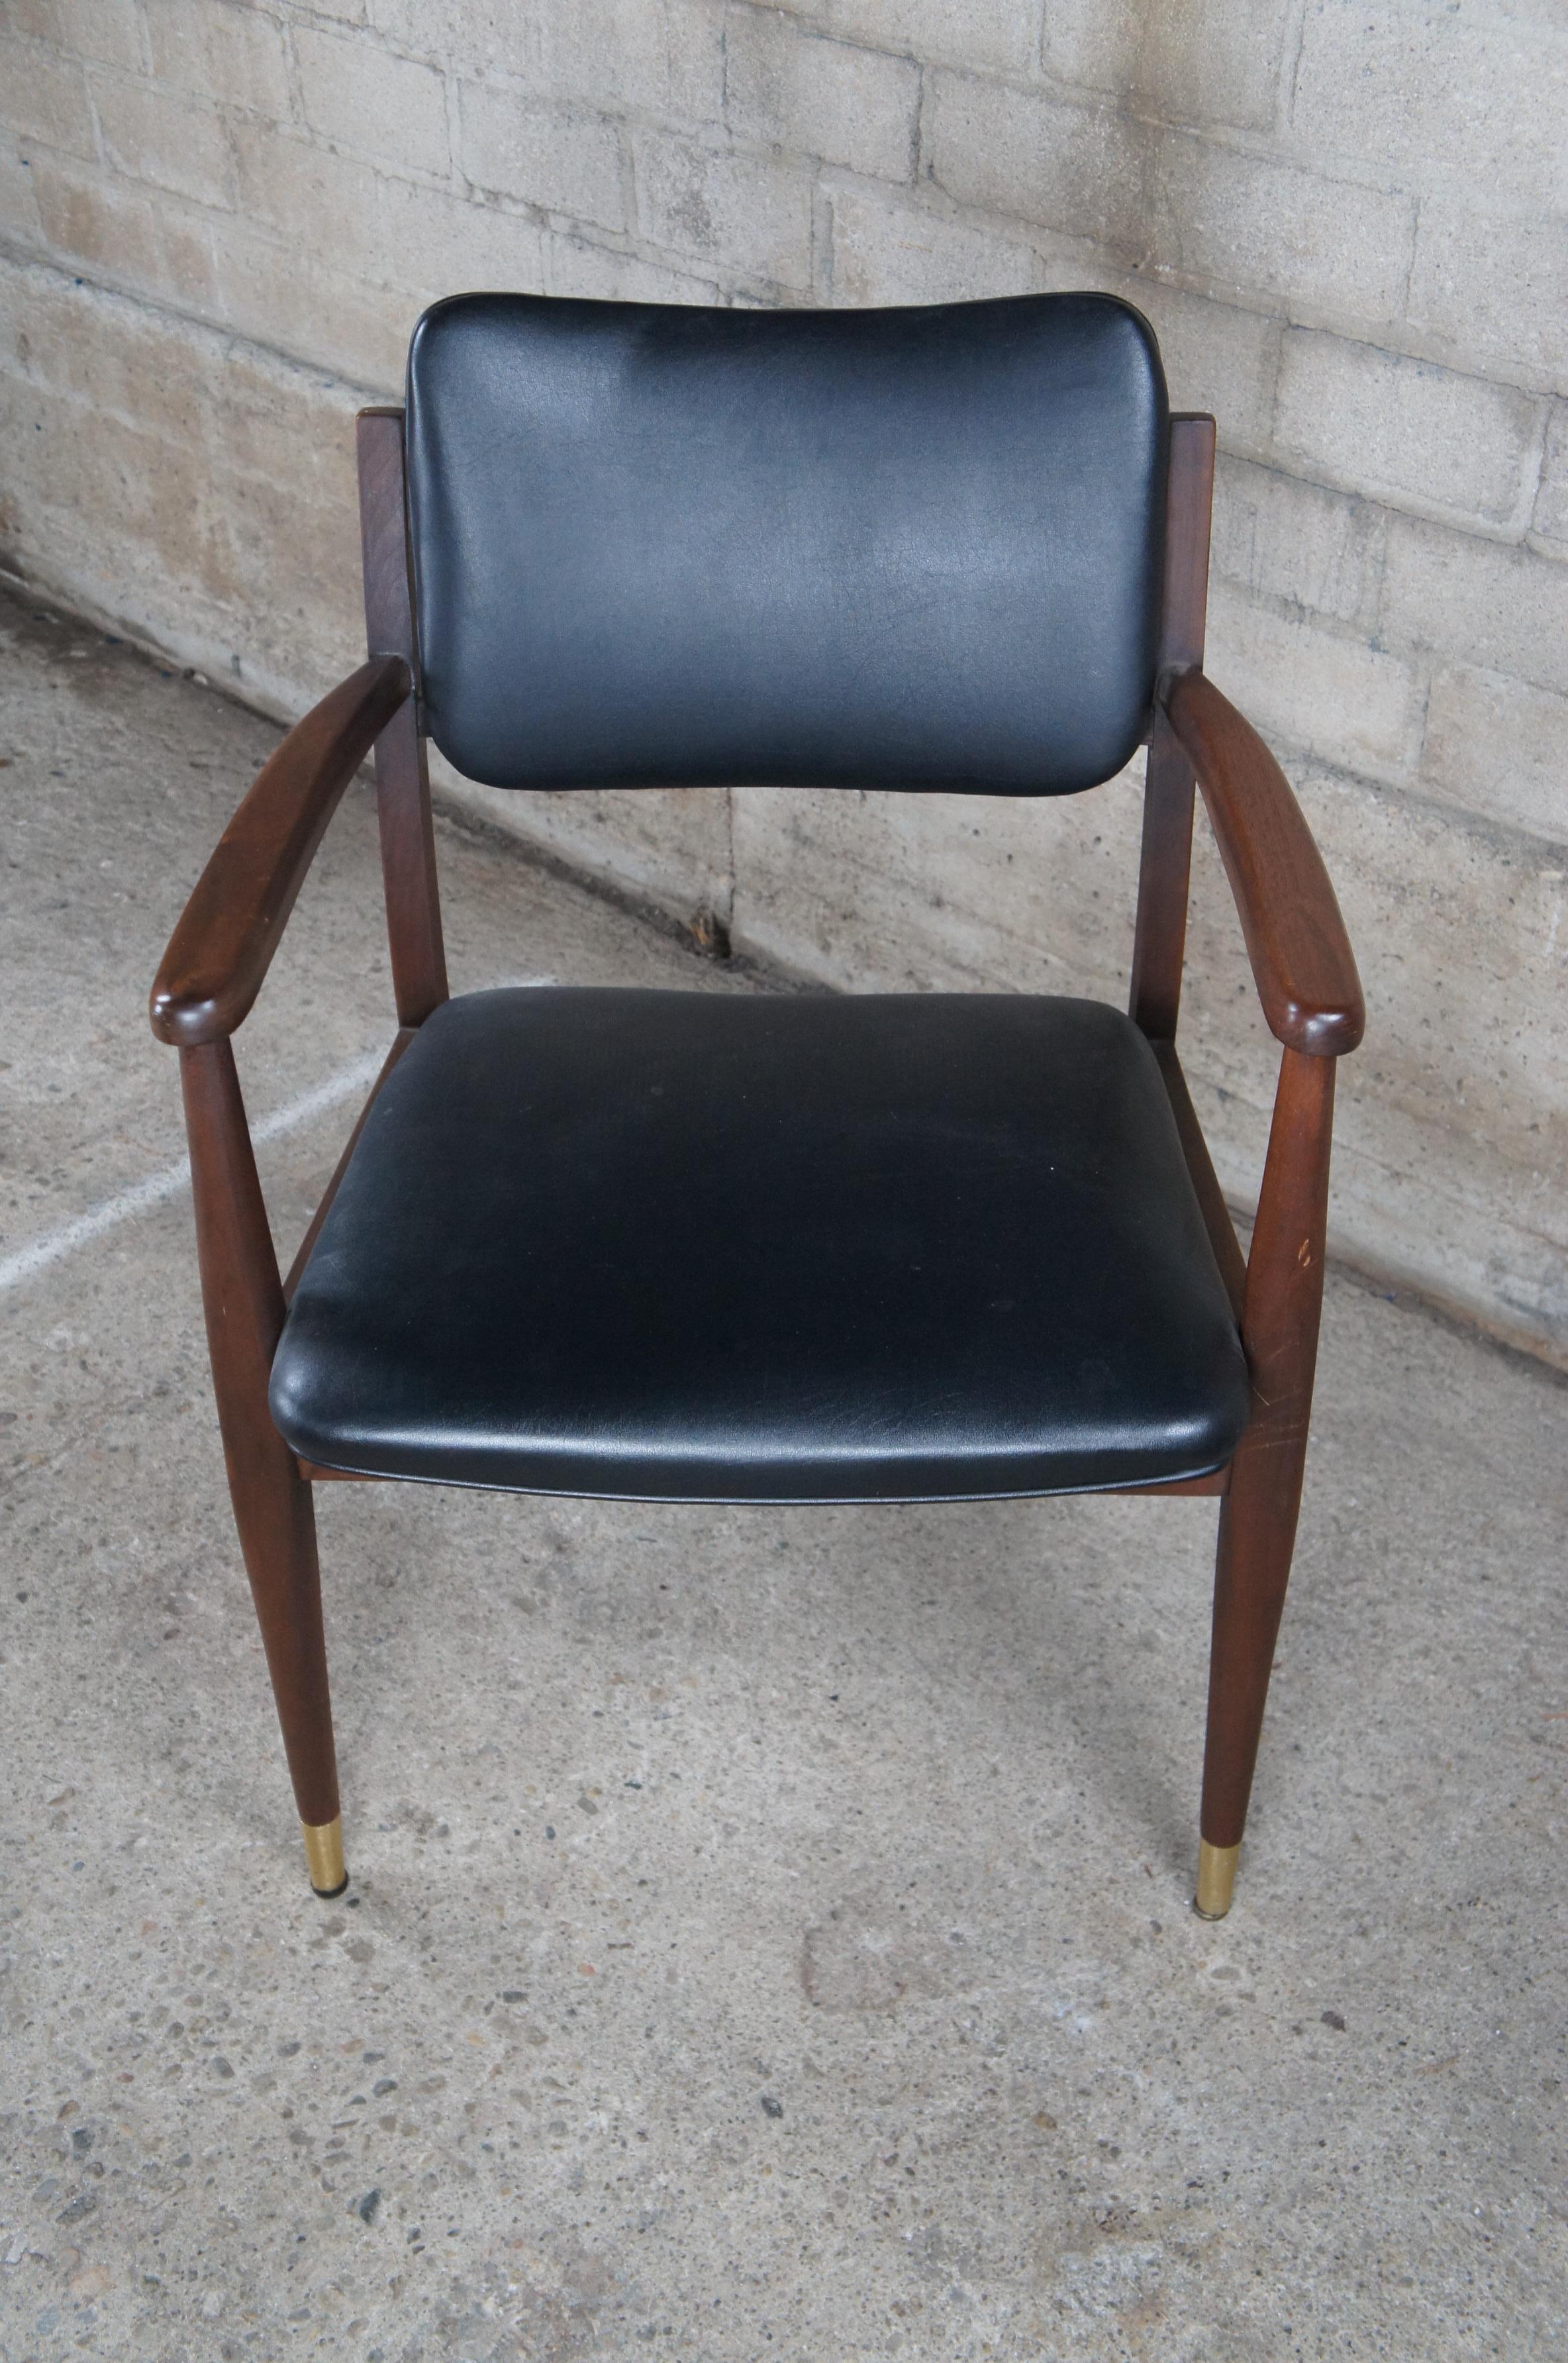 2 Mid Century Modern Gregson Danish Style Walnut & Leather Arms Chairs MCM Pair In Good Condition For Sale In Dayton, OH